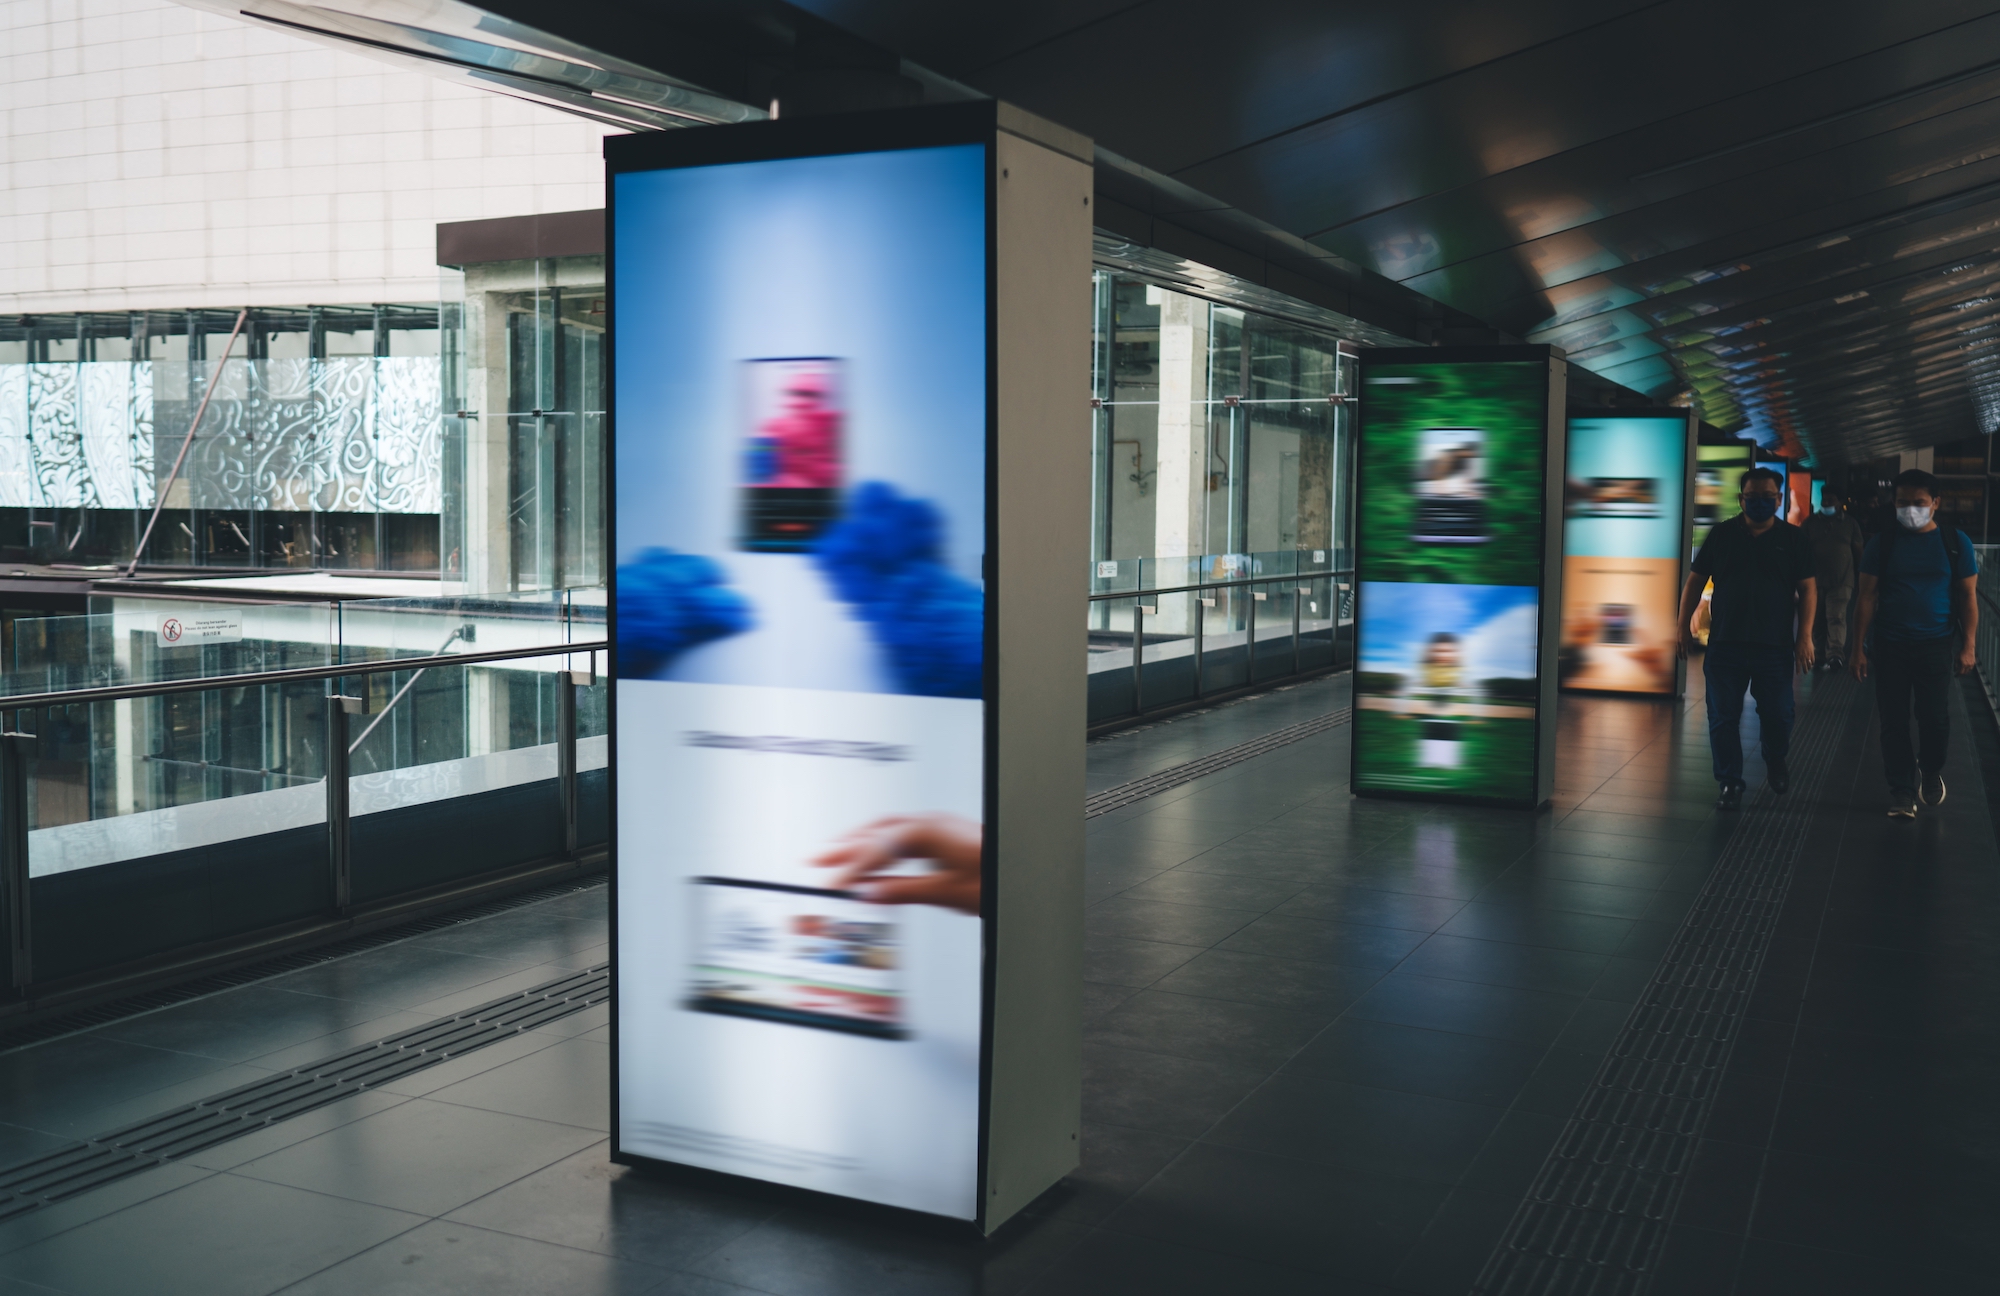 Blurred digital ads in a public walkway are pictured.